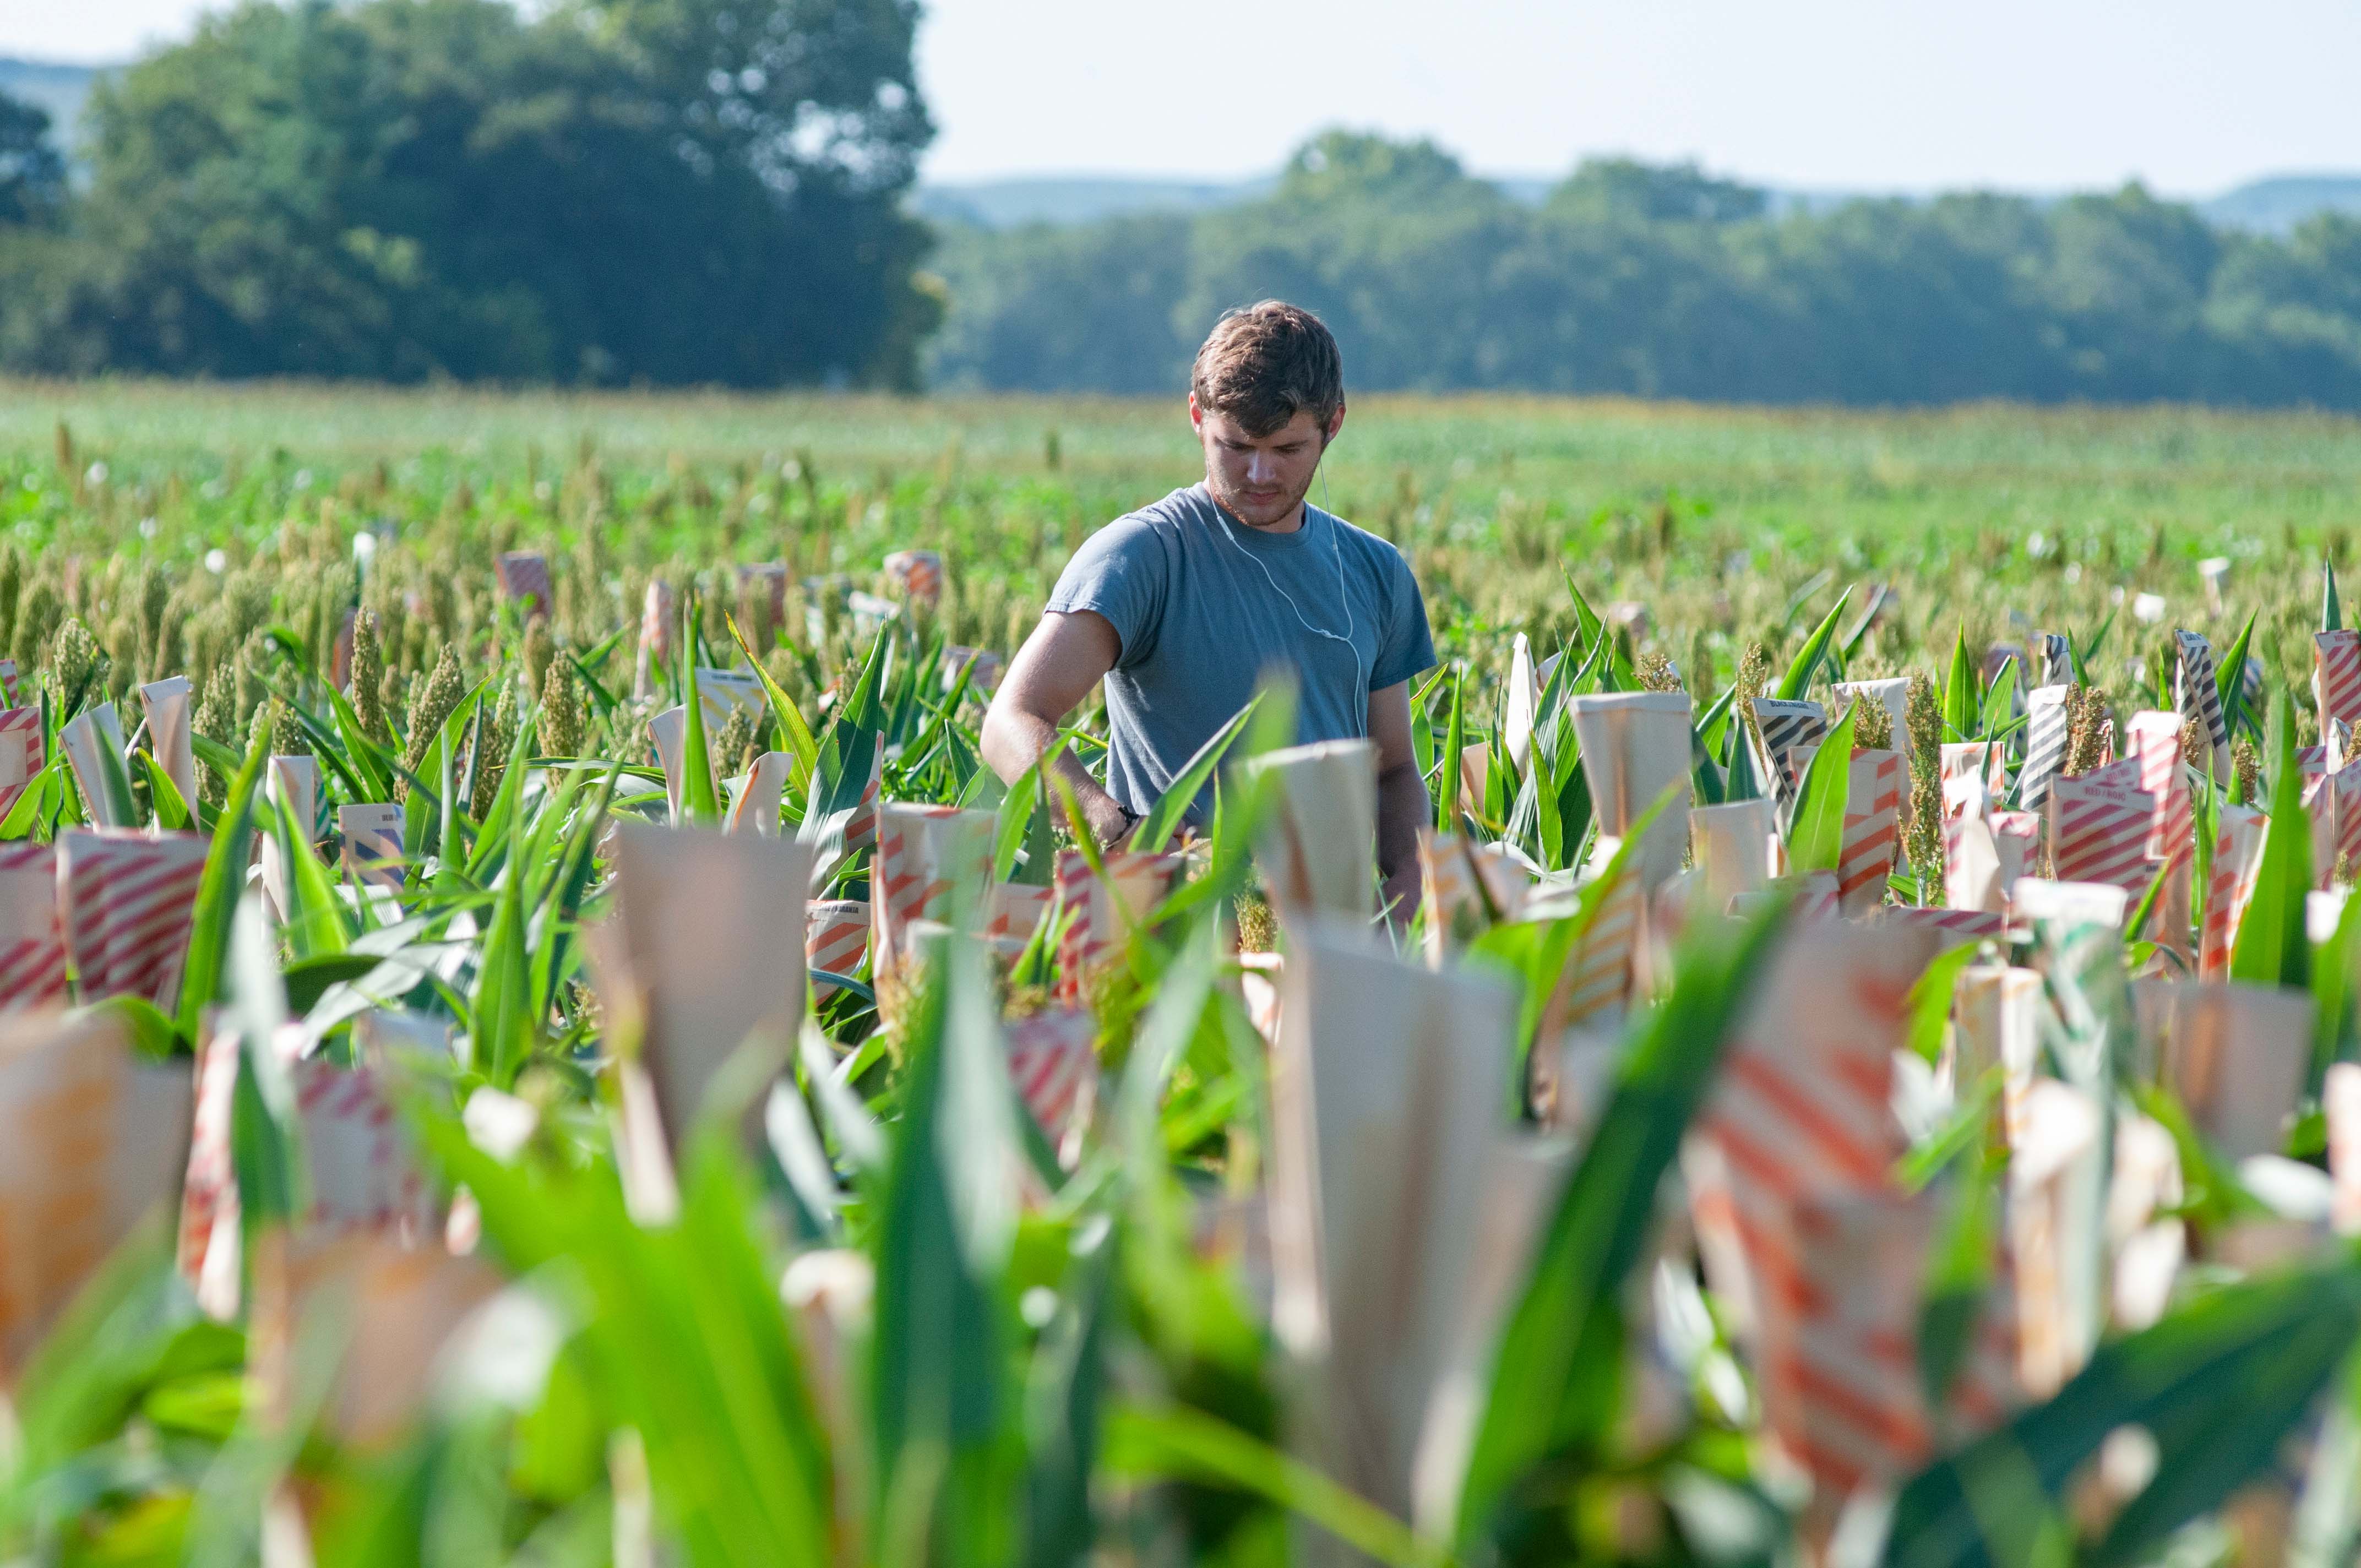 Student Research in Sorghum Field